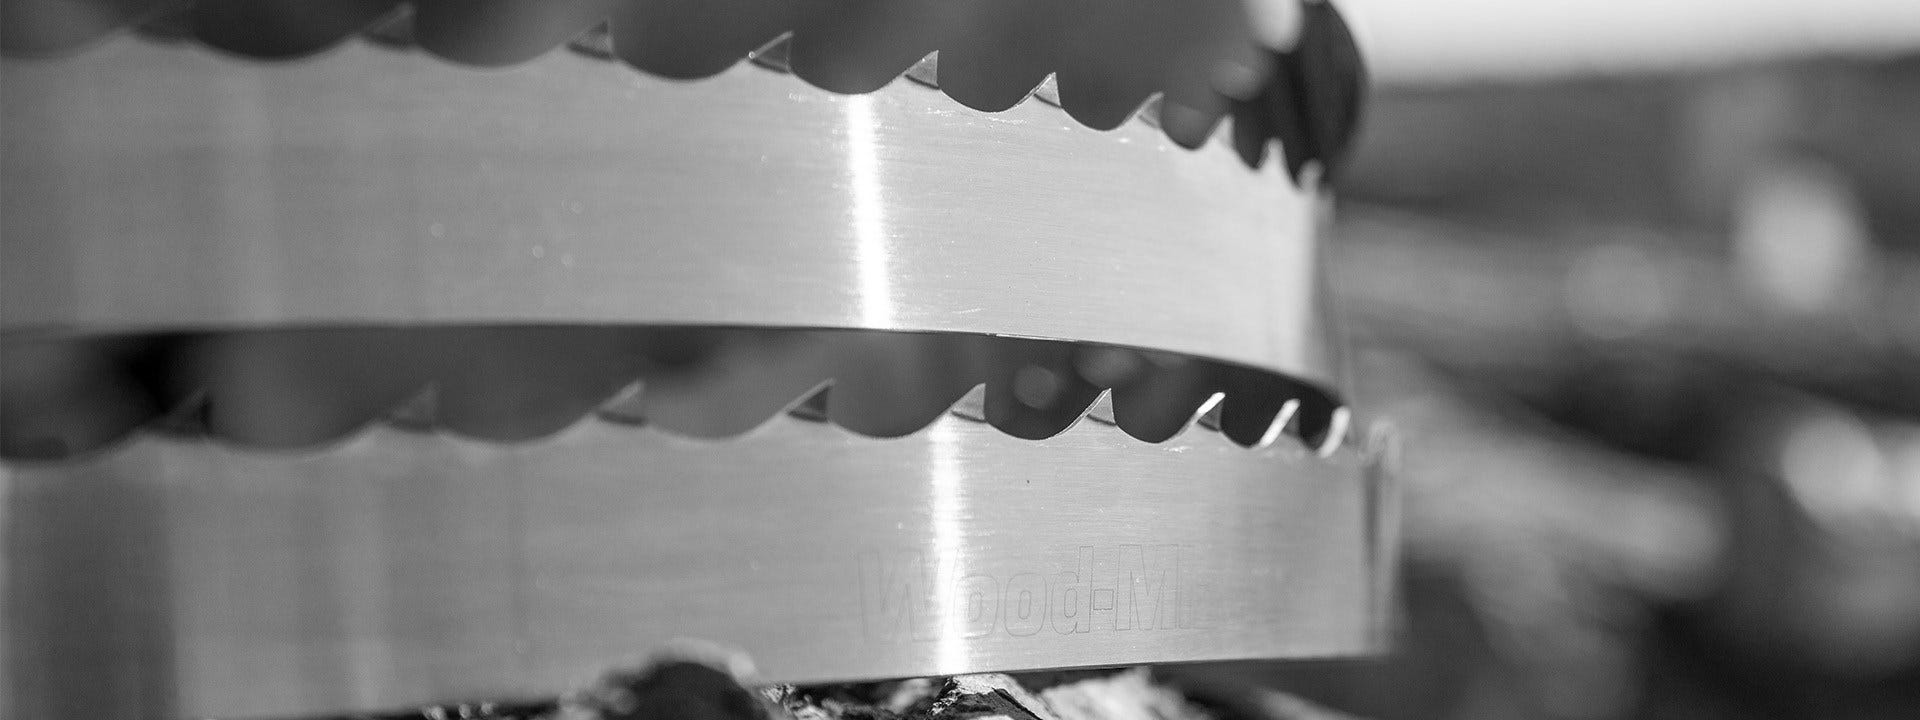 The LT40 Sawmill History: Blades and Blade Guide System Upgrades